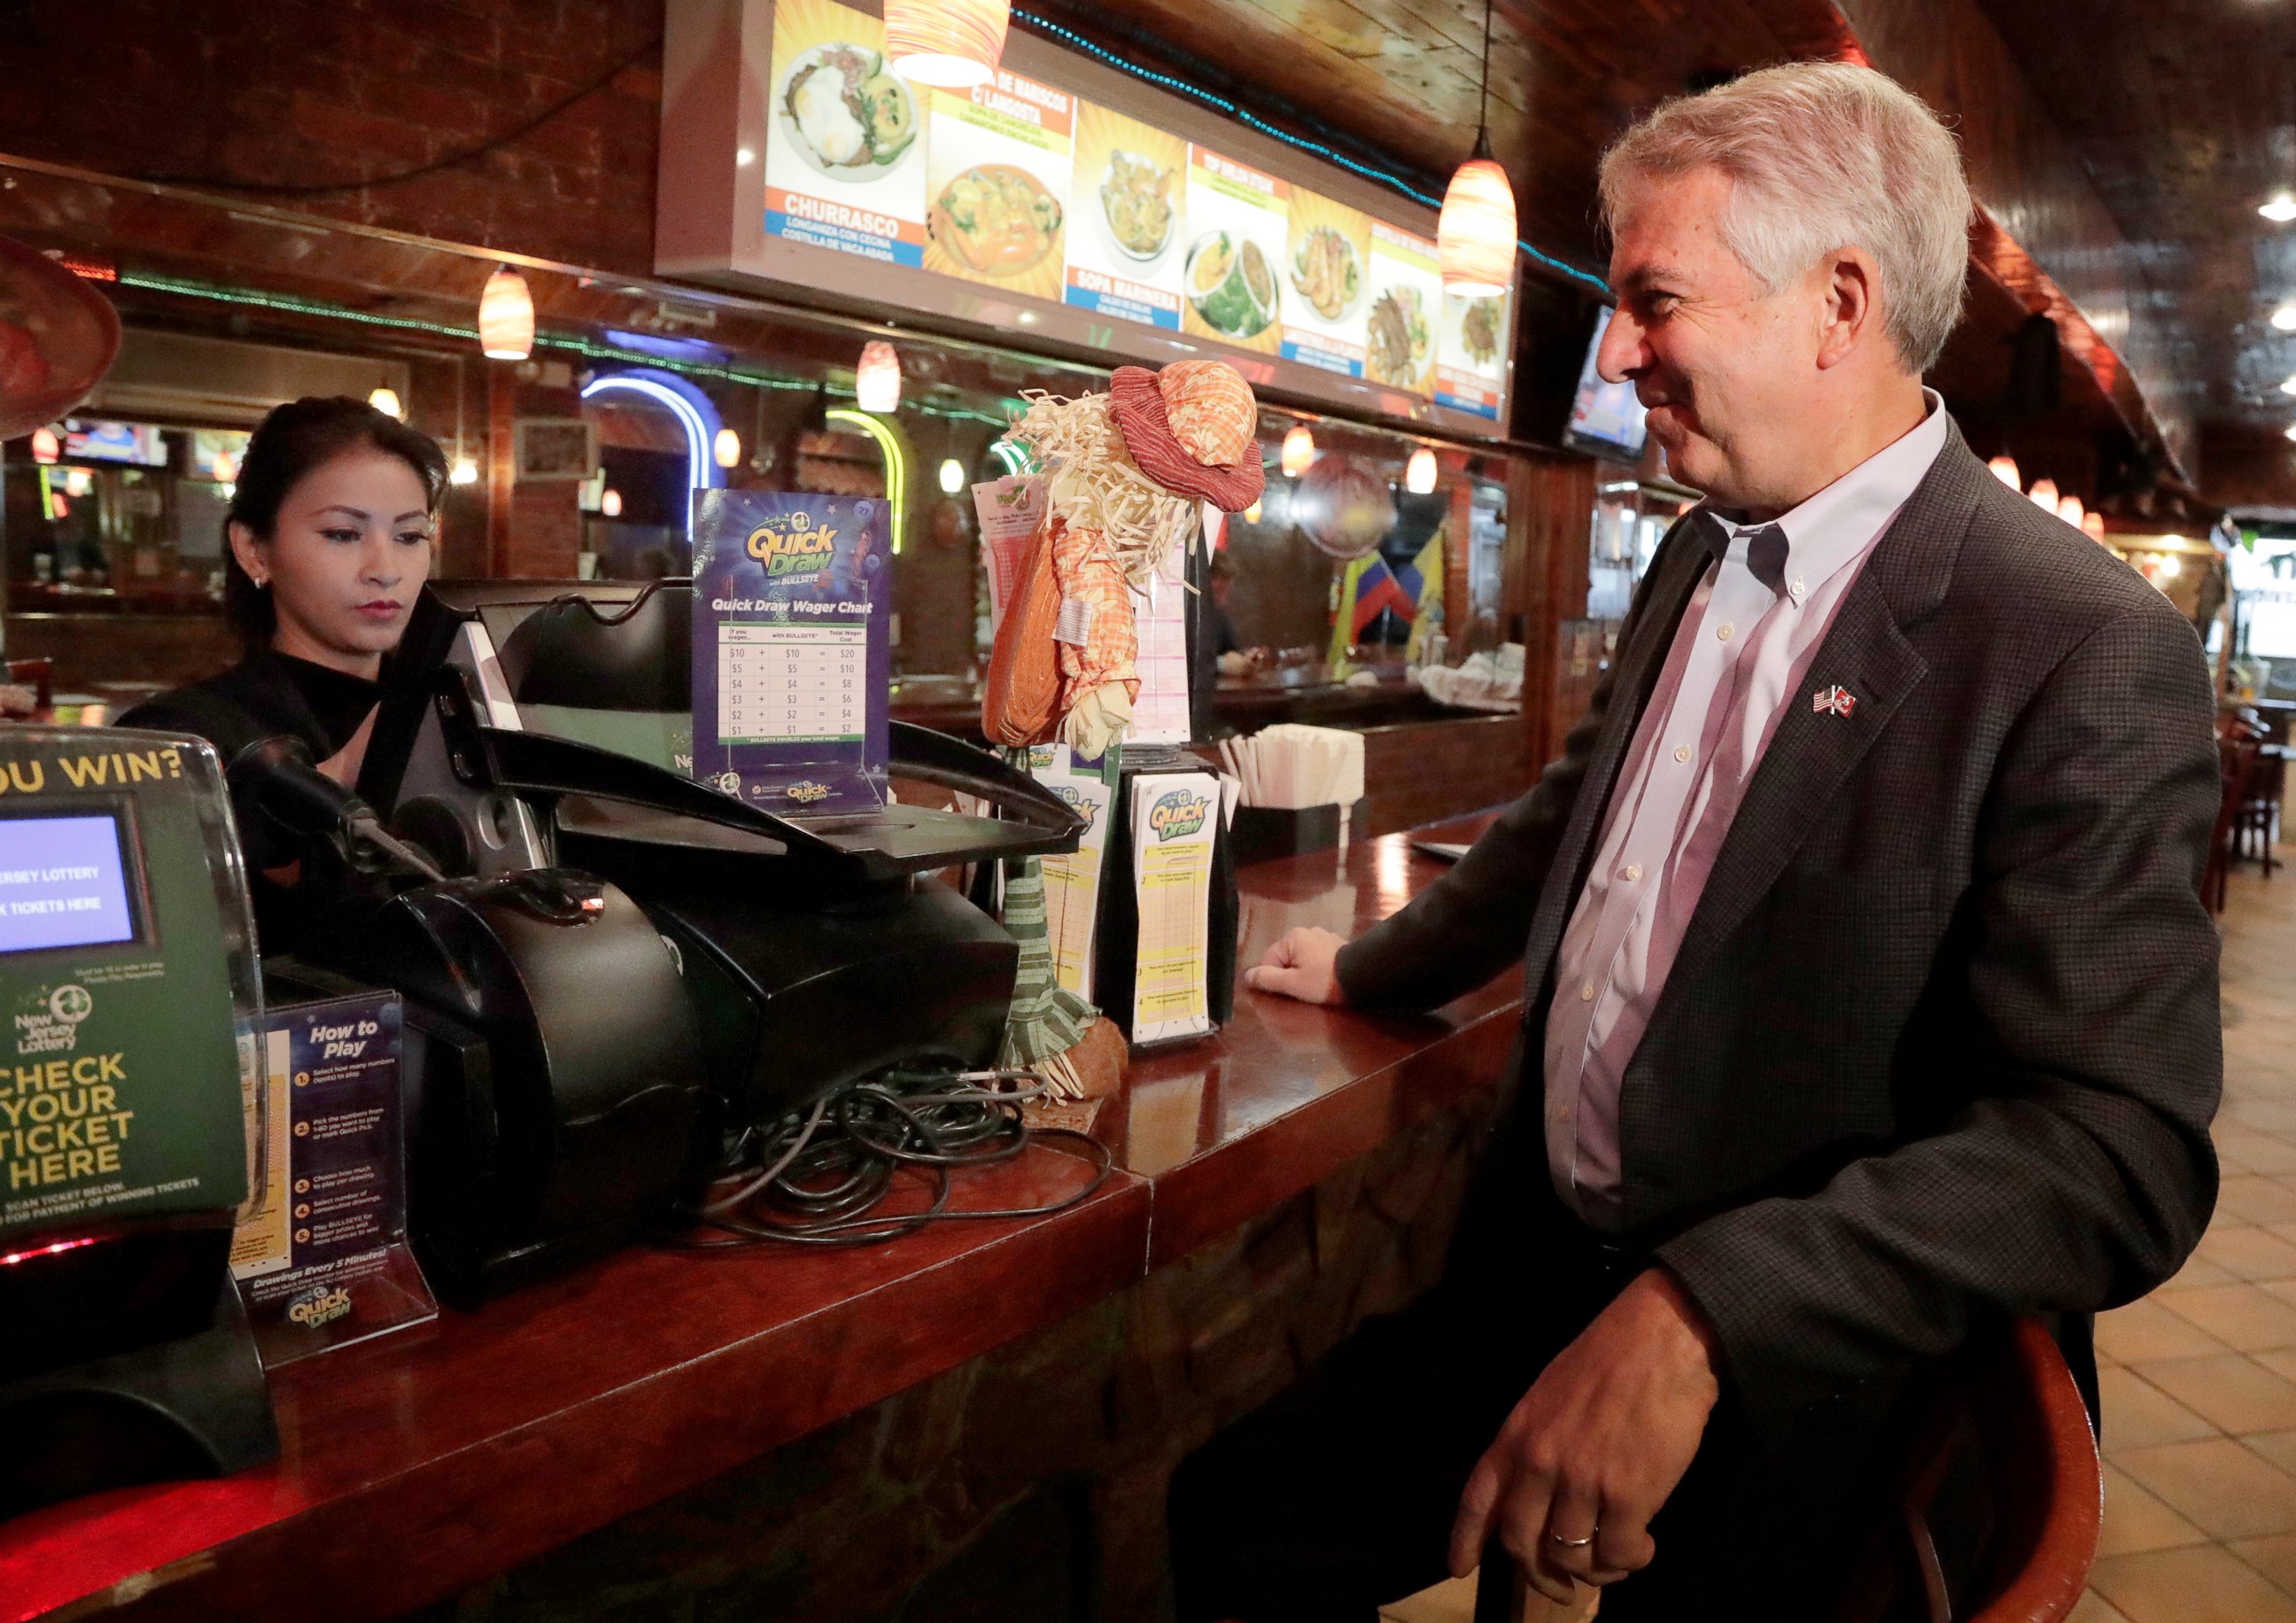 PHOTO: Bob Hugin, right, the Republican candidate in the U.S. Senate race in New Jersey, purchases a Mega Millions lottery ticket at Sabor Latino, a restaurant where he held a news conference Tuesday, Oct. 23, 2018, in Newark, N.J.